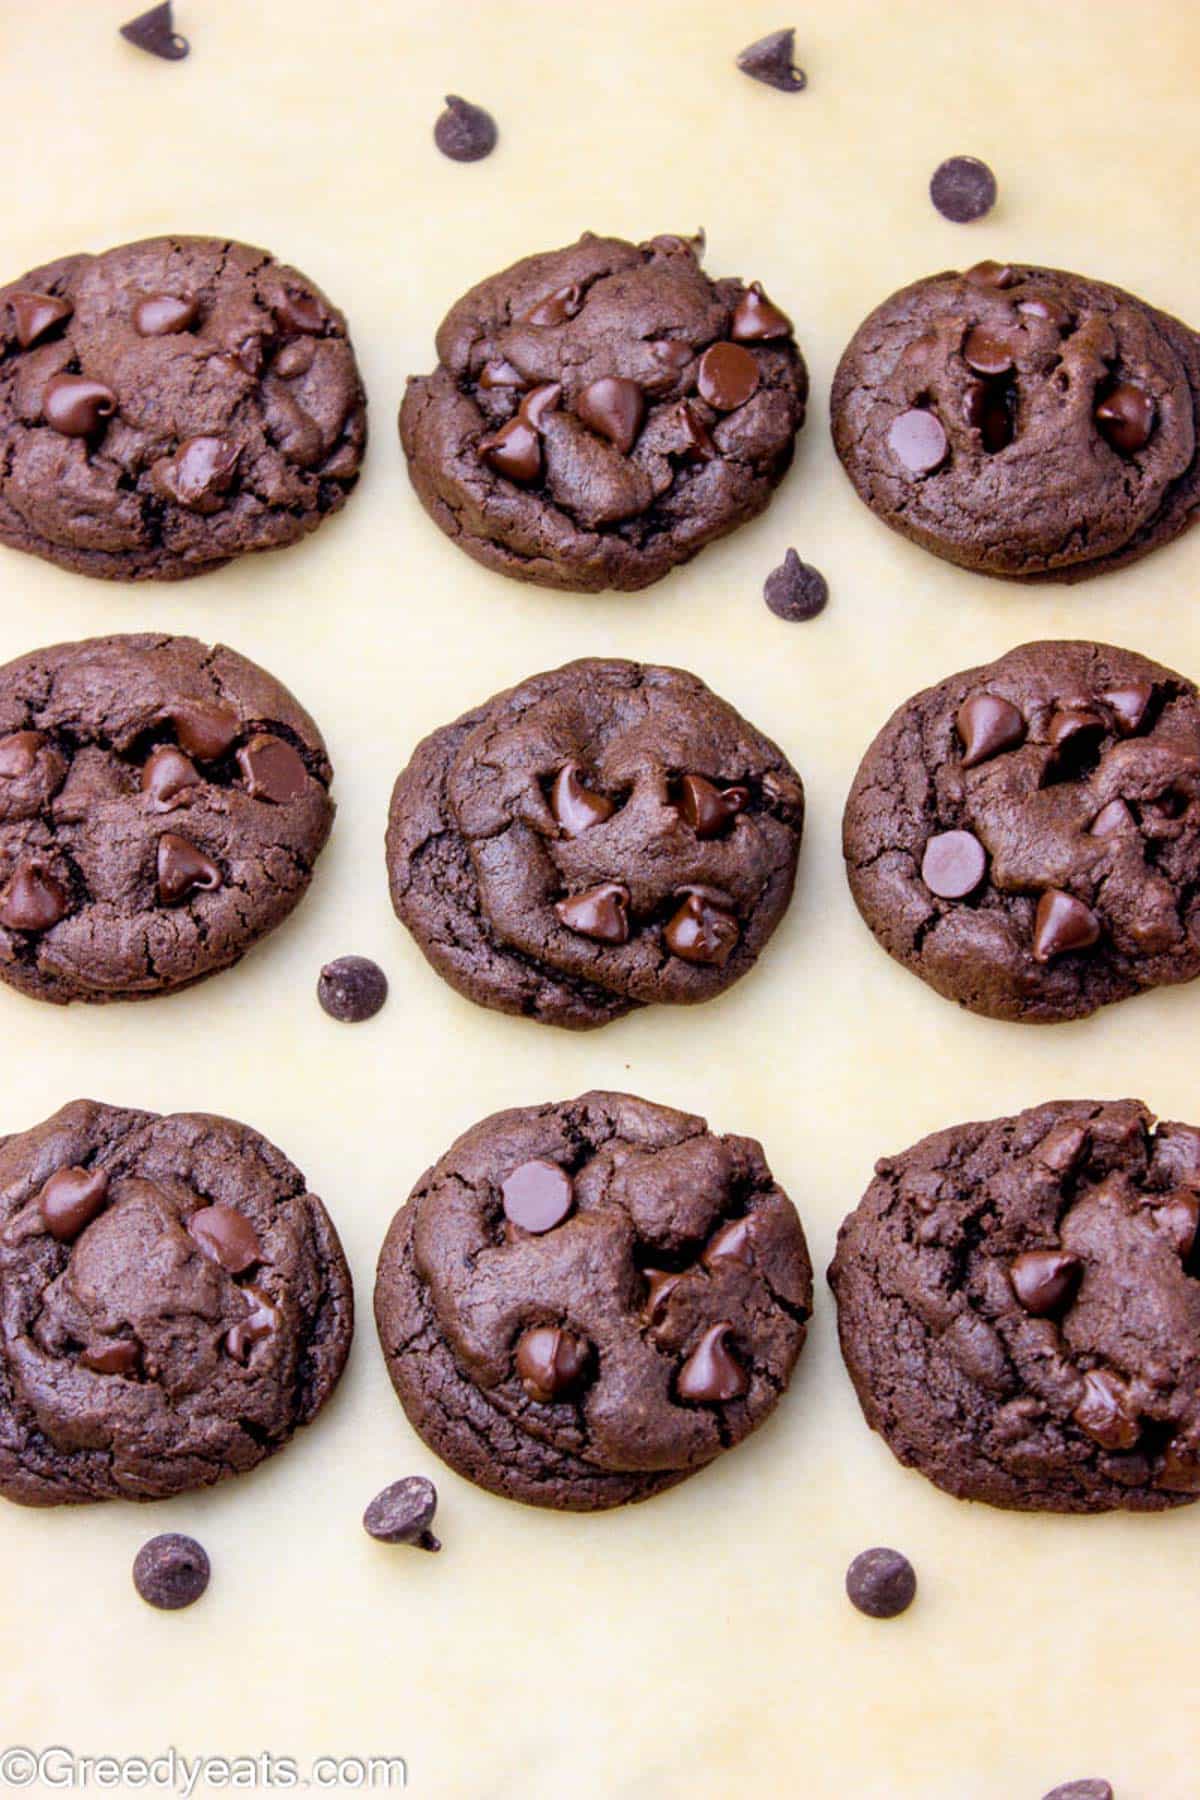 Baked chocolate cookies cooling on baking tray.